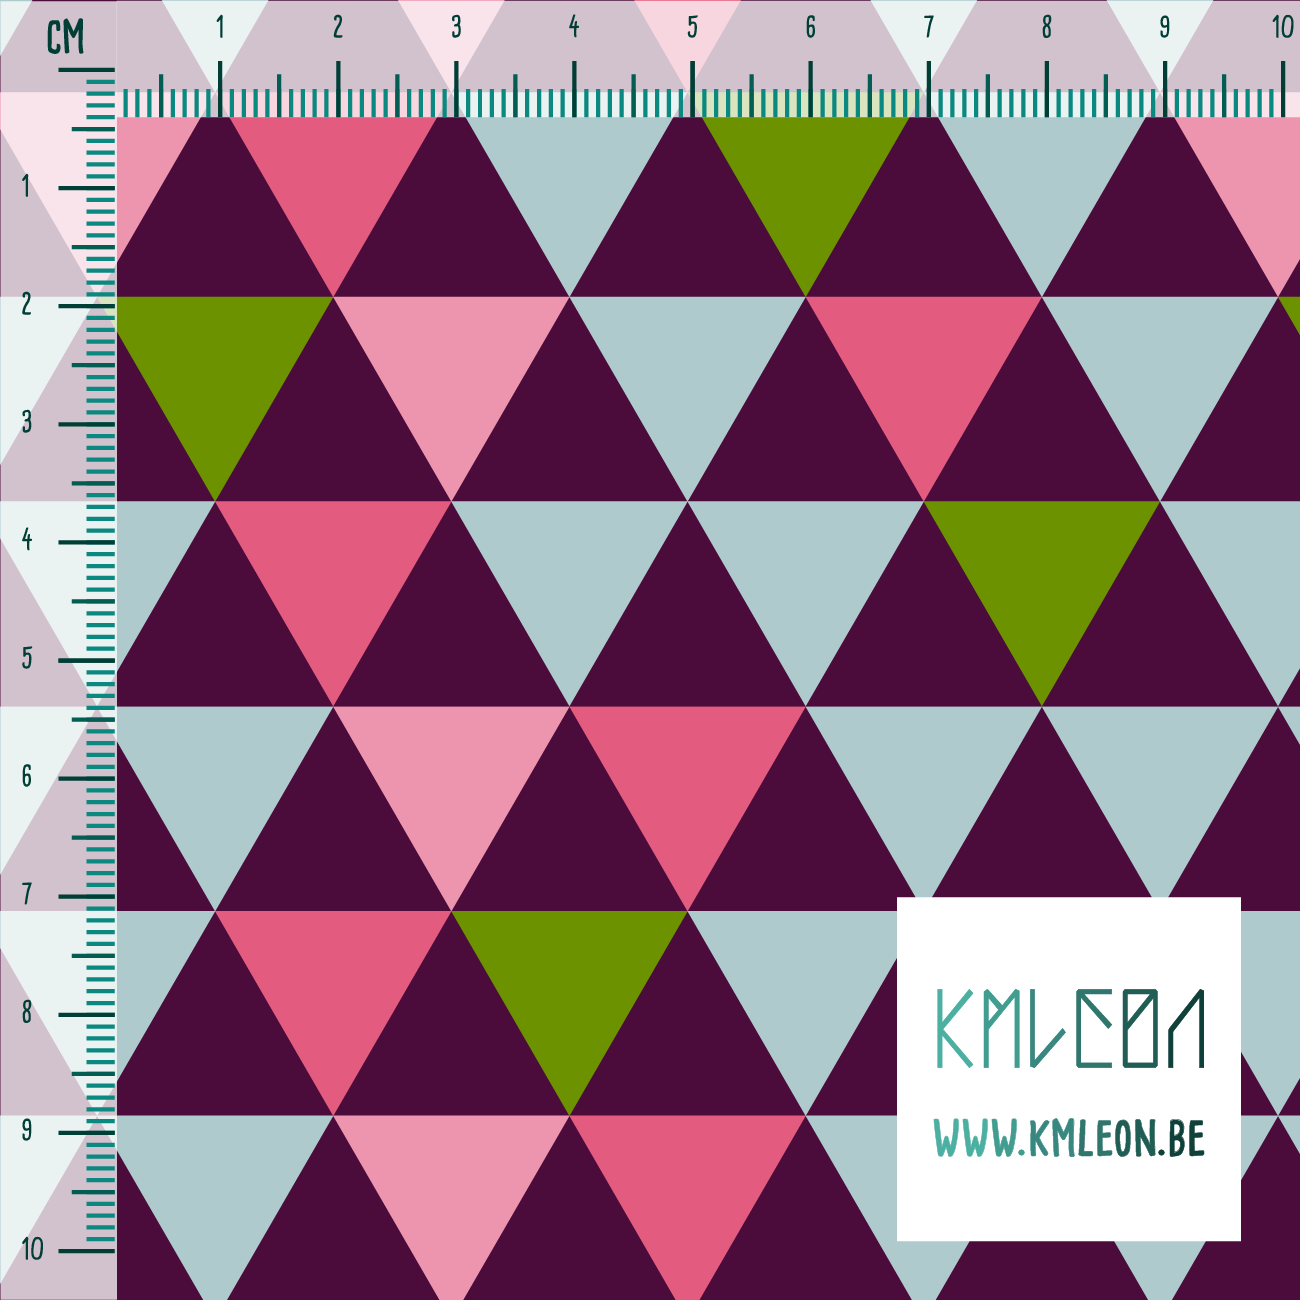 Light blue, pink and green triangles fabric